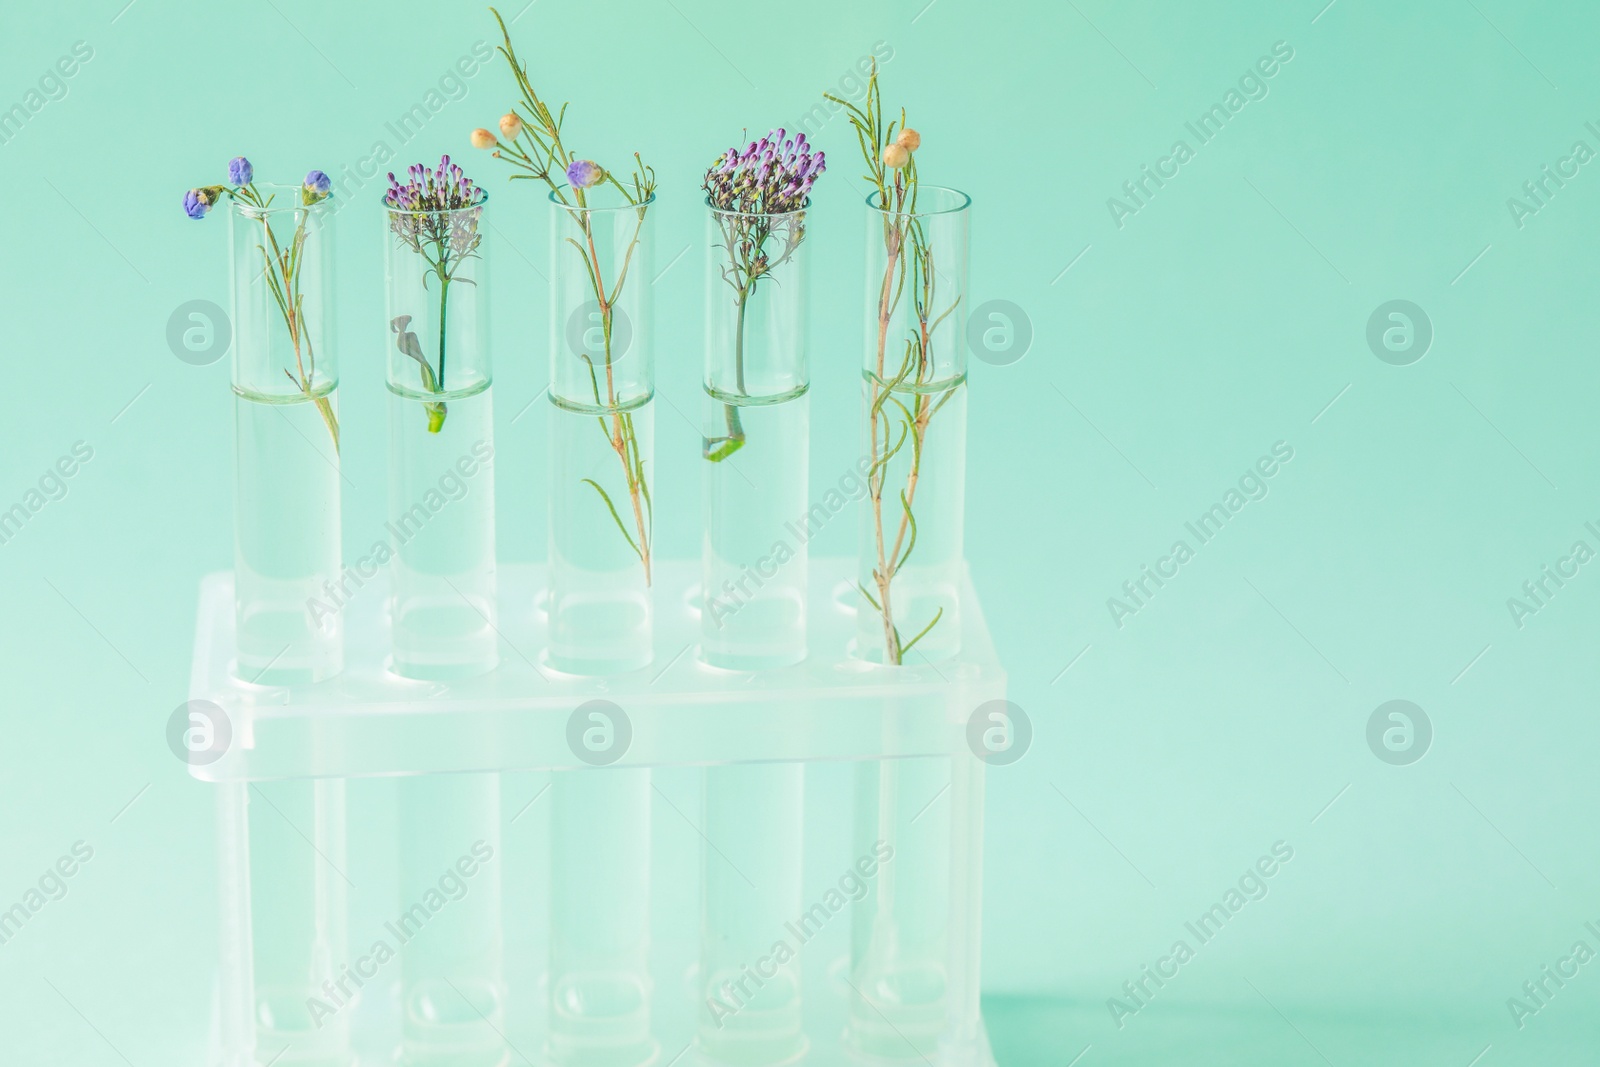 Photo of Different plants in test tubes on light turquoise background. Space for text